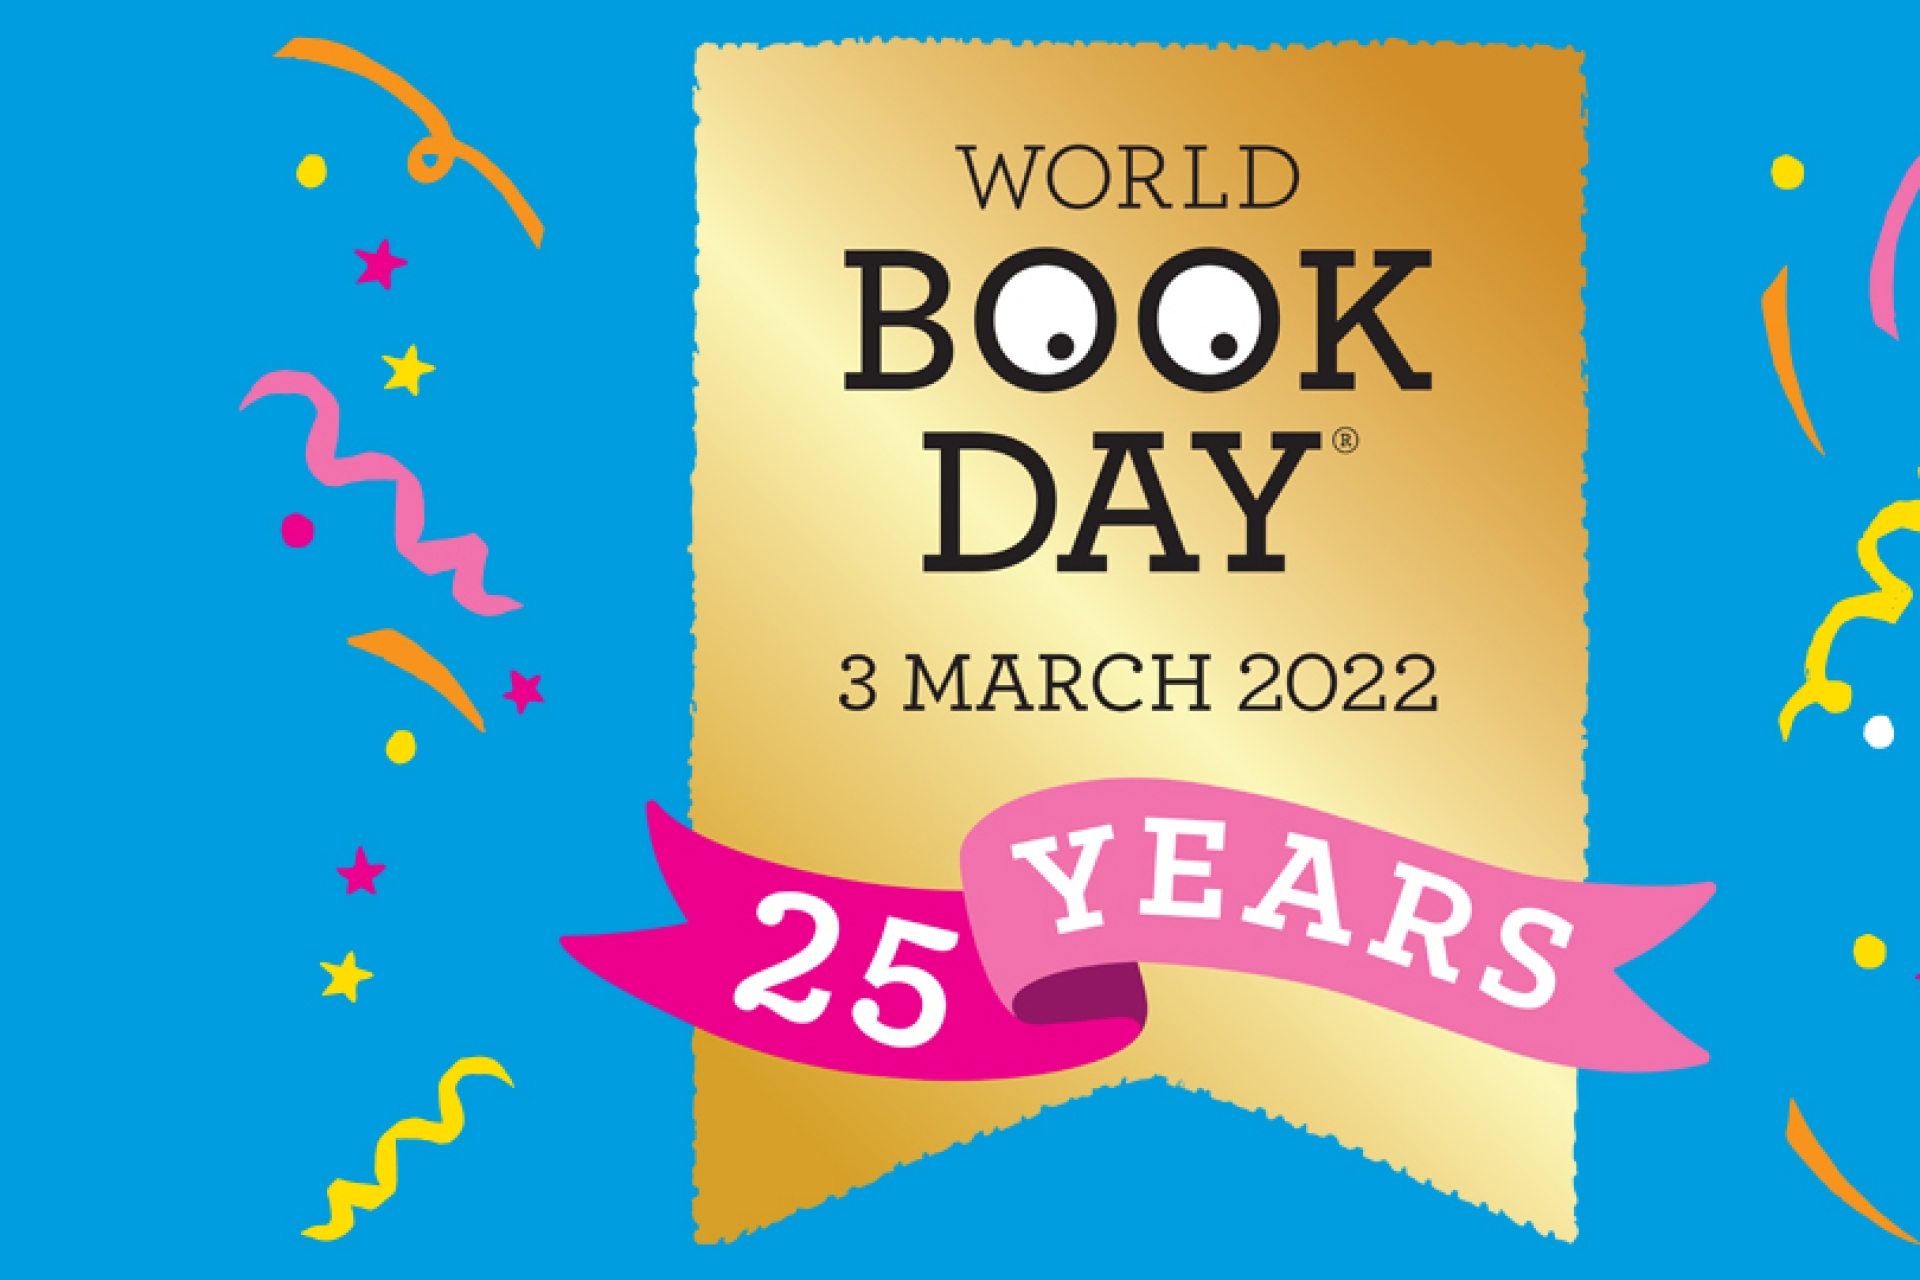 World Book Day - 03 March 2022